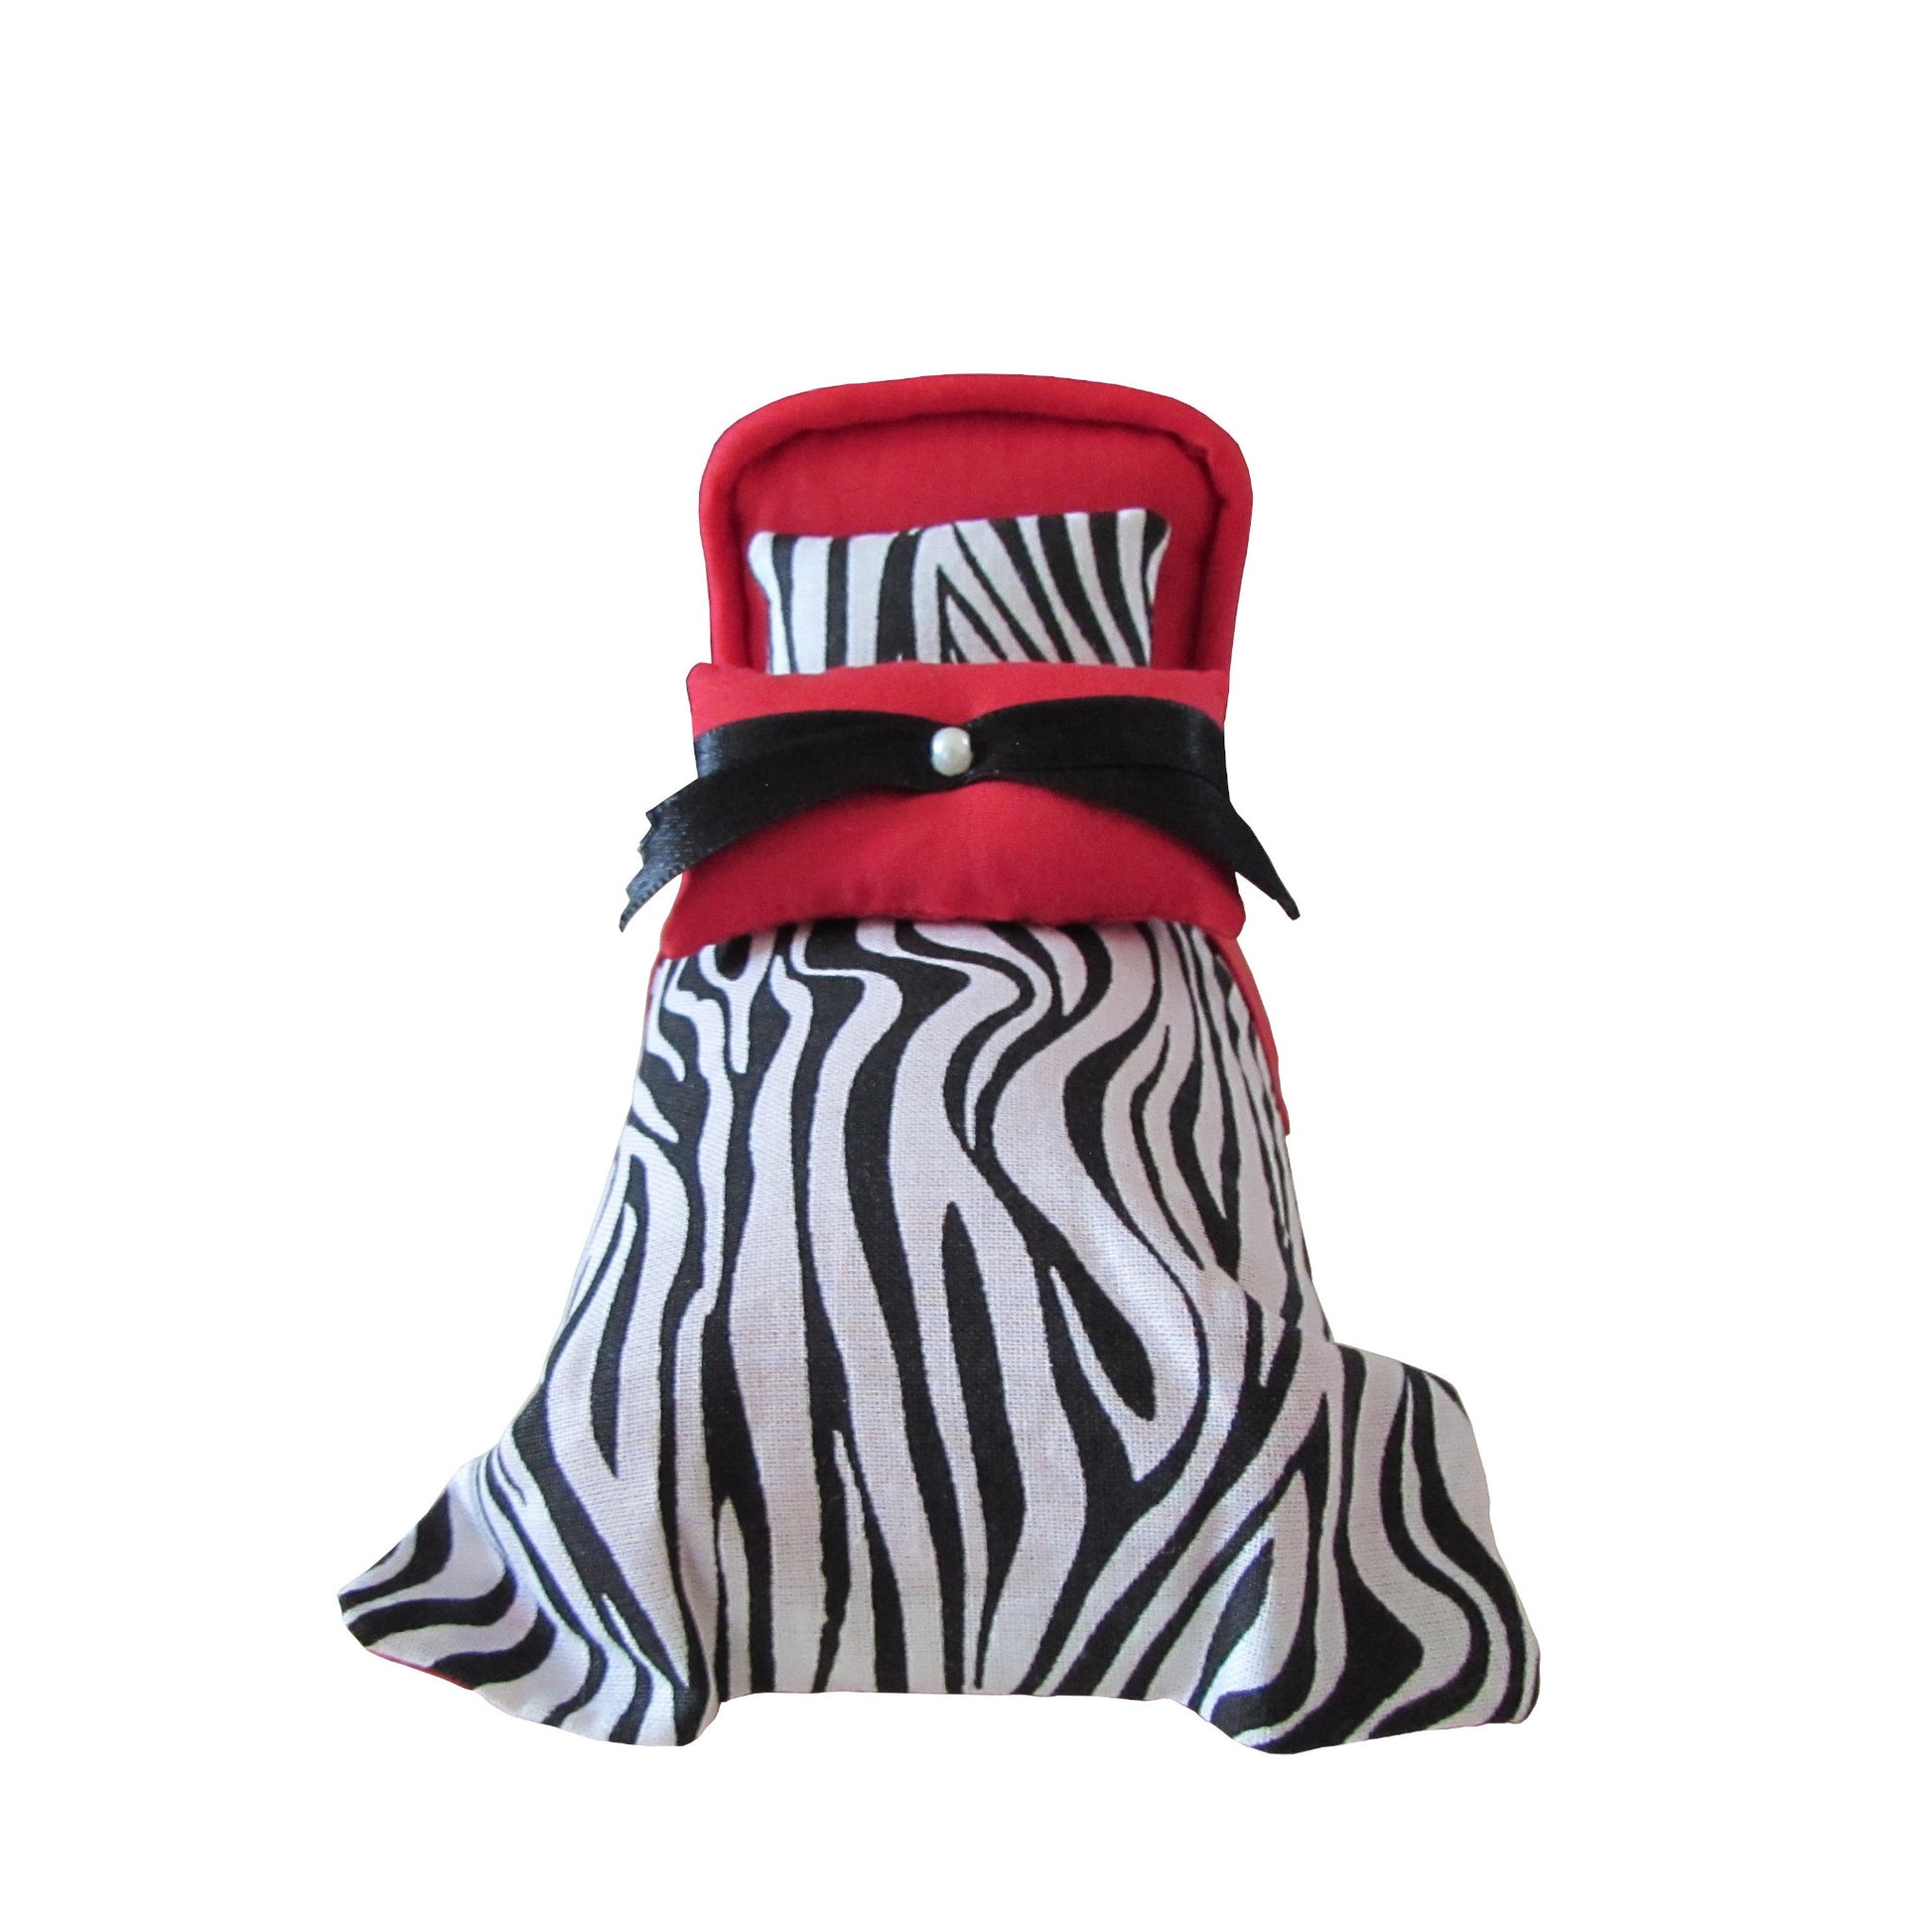 Red Pincushion Bed with Zebra Bedding Top view